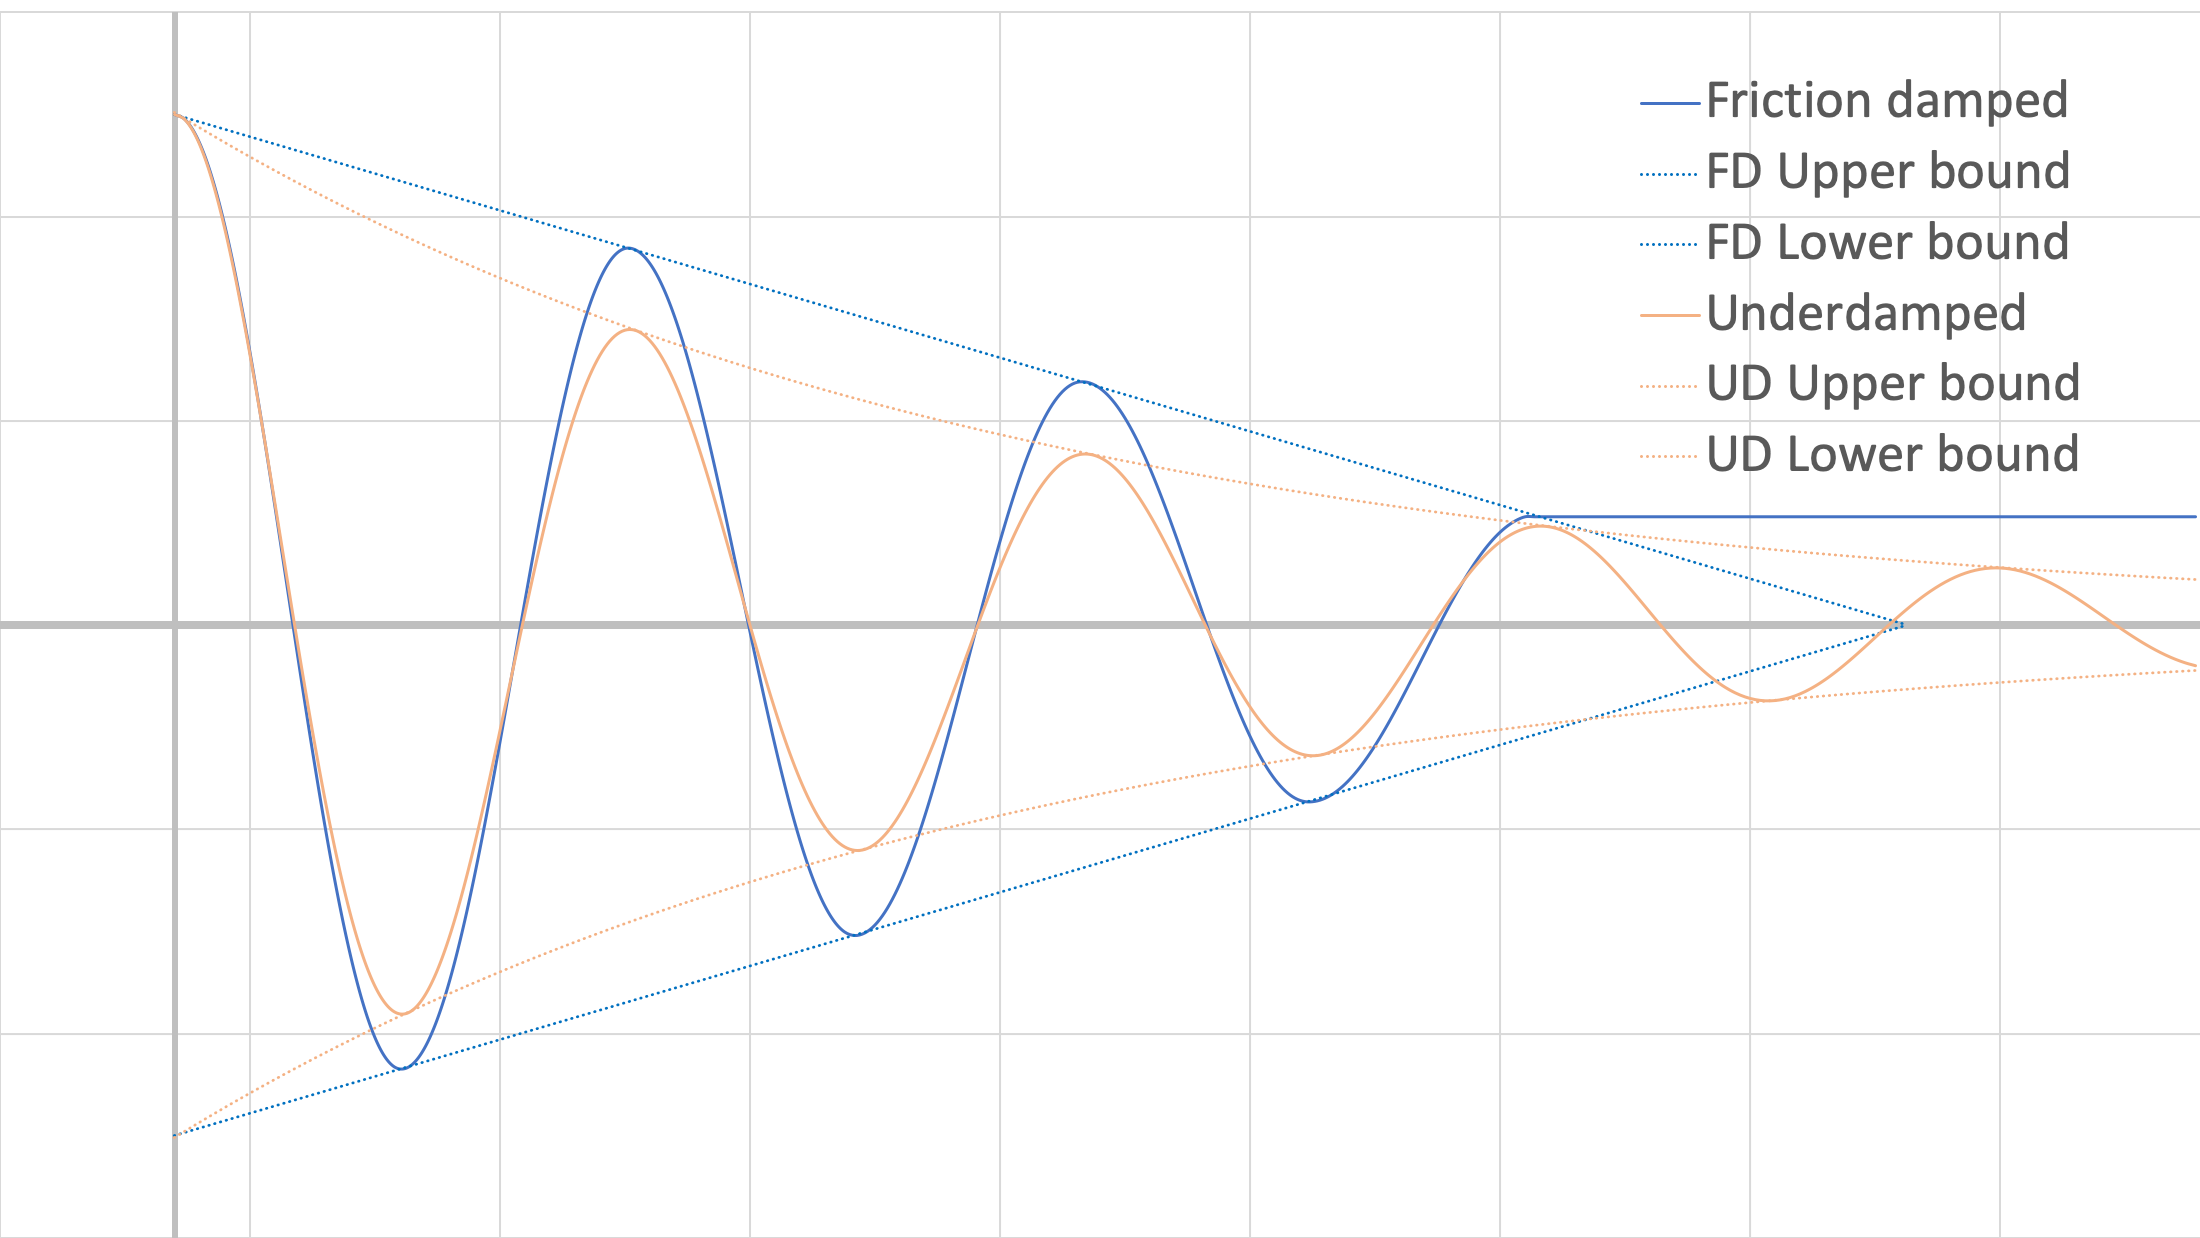 Graph of a mass-spring system's friction-damped and viscous underdamped responses. Both graphs oscillate about the t-axis with decaying amplitude. The upper and lower bounds of the friction-damped response graph are represented by one straight line connecting all the peaks and another straight line connecting all the troughs, with the two lines eventually intersecting at the t-axis. The upper and lower bounds of the viscous underdamped response graph are represented by one smooth curve connecting all the peaks and another smooth curve connecting all the troughs, with both curves approaching but never intersecting the t-axis.